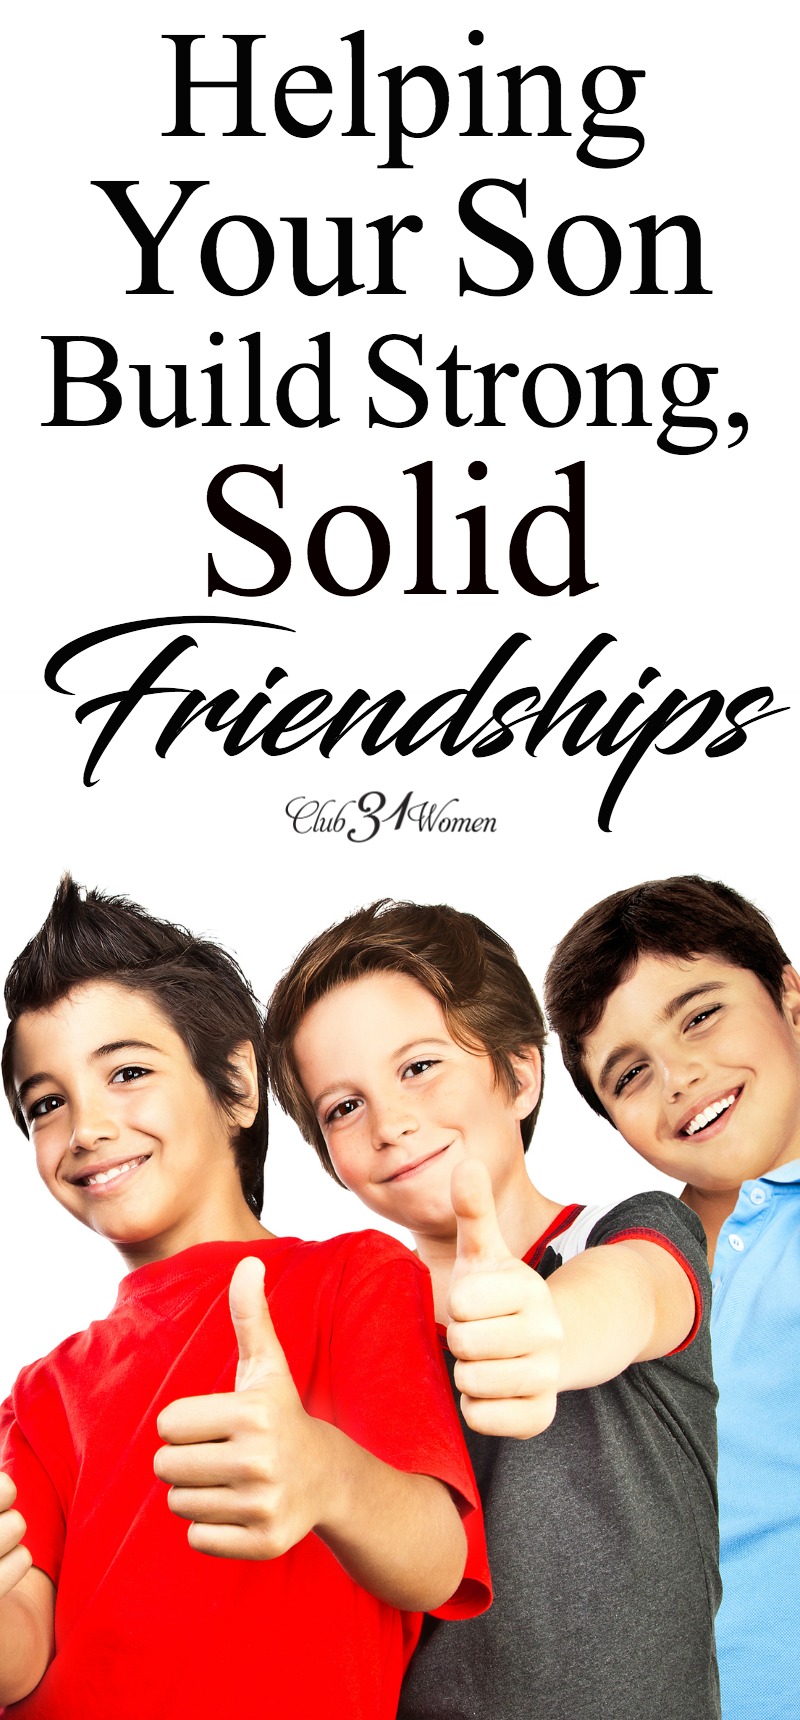 Friendship plays such a powerful role in a young man's life! But often our sons need encouragement and wisdom from us to build strong, positive friendships. via @Club31Women